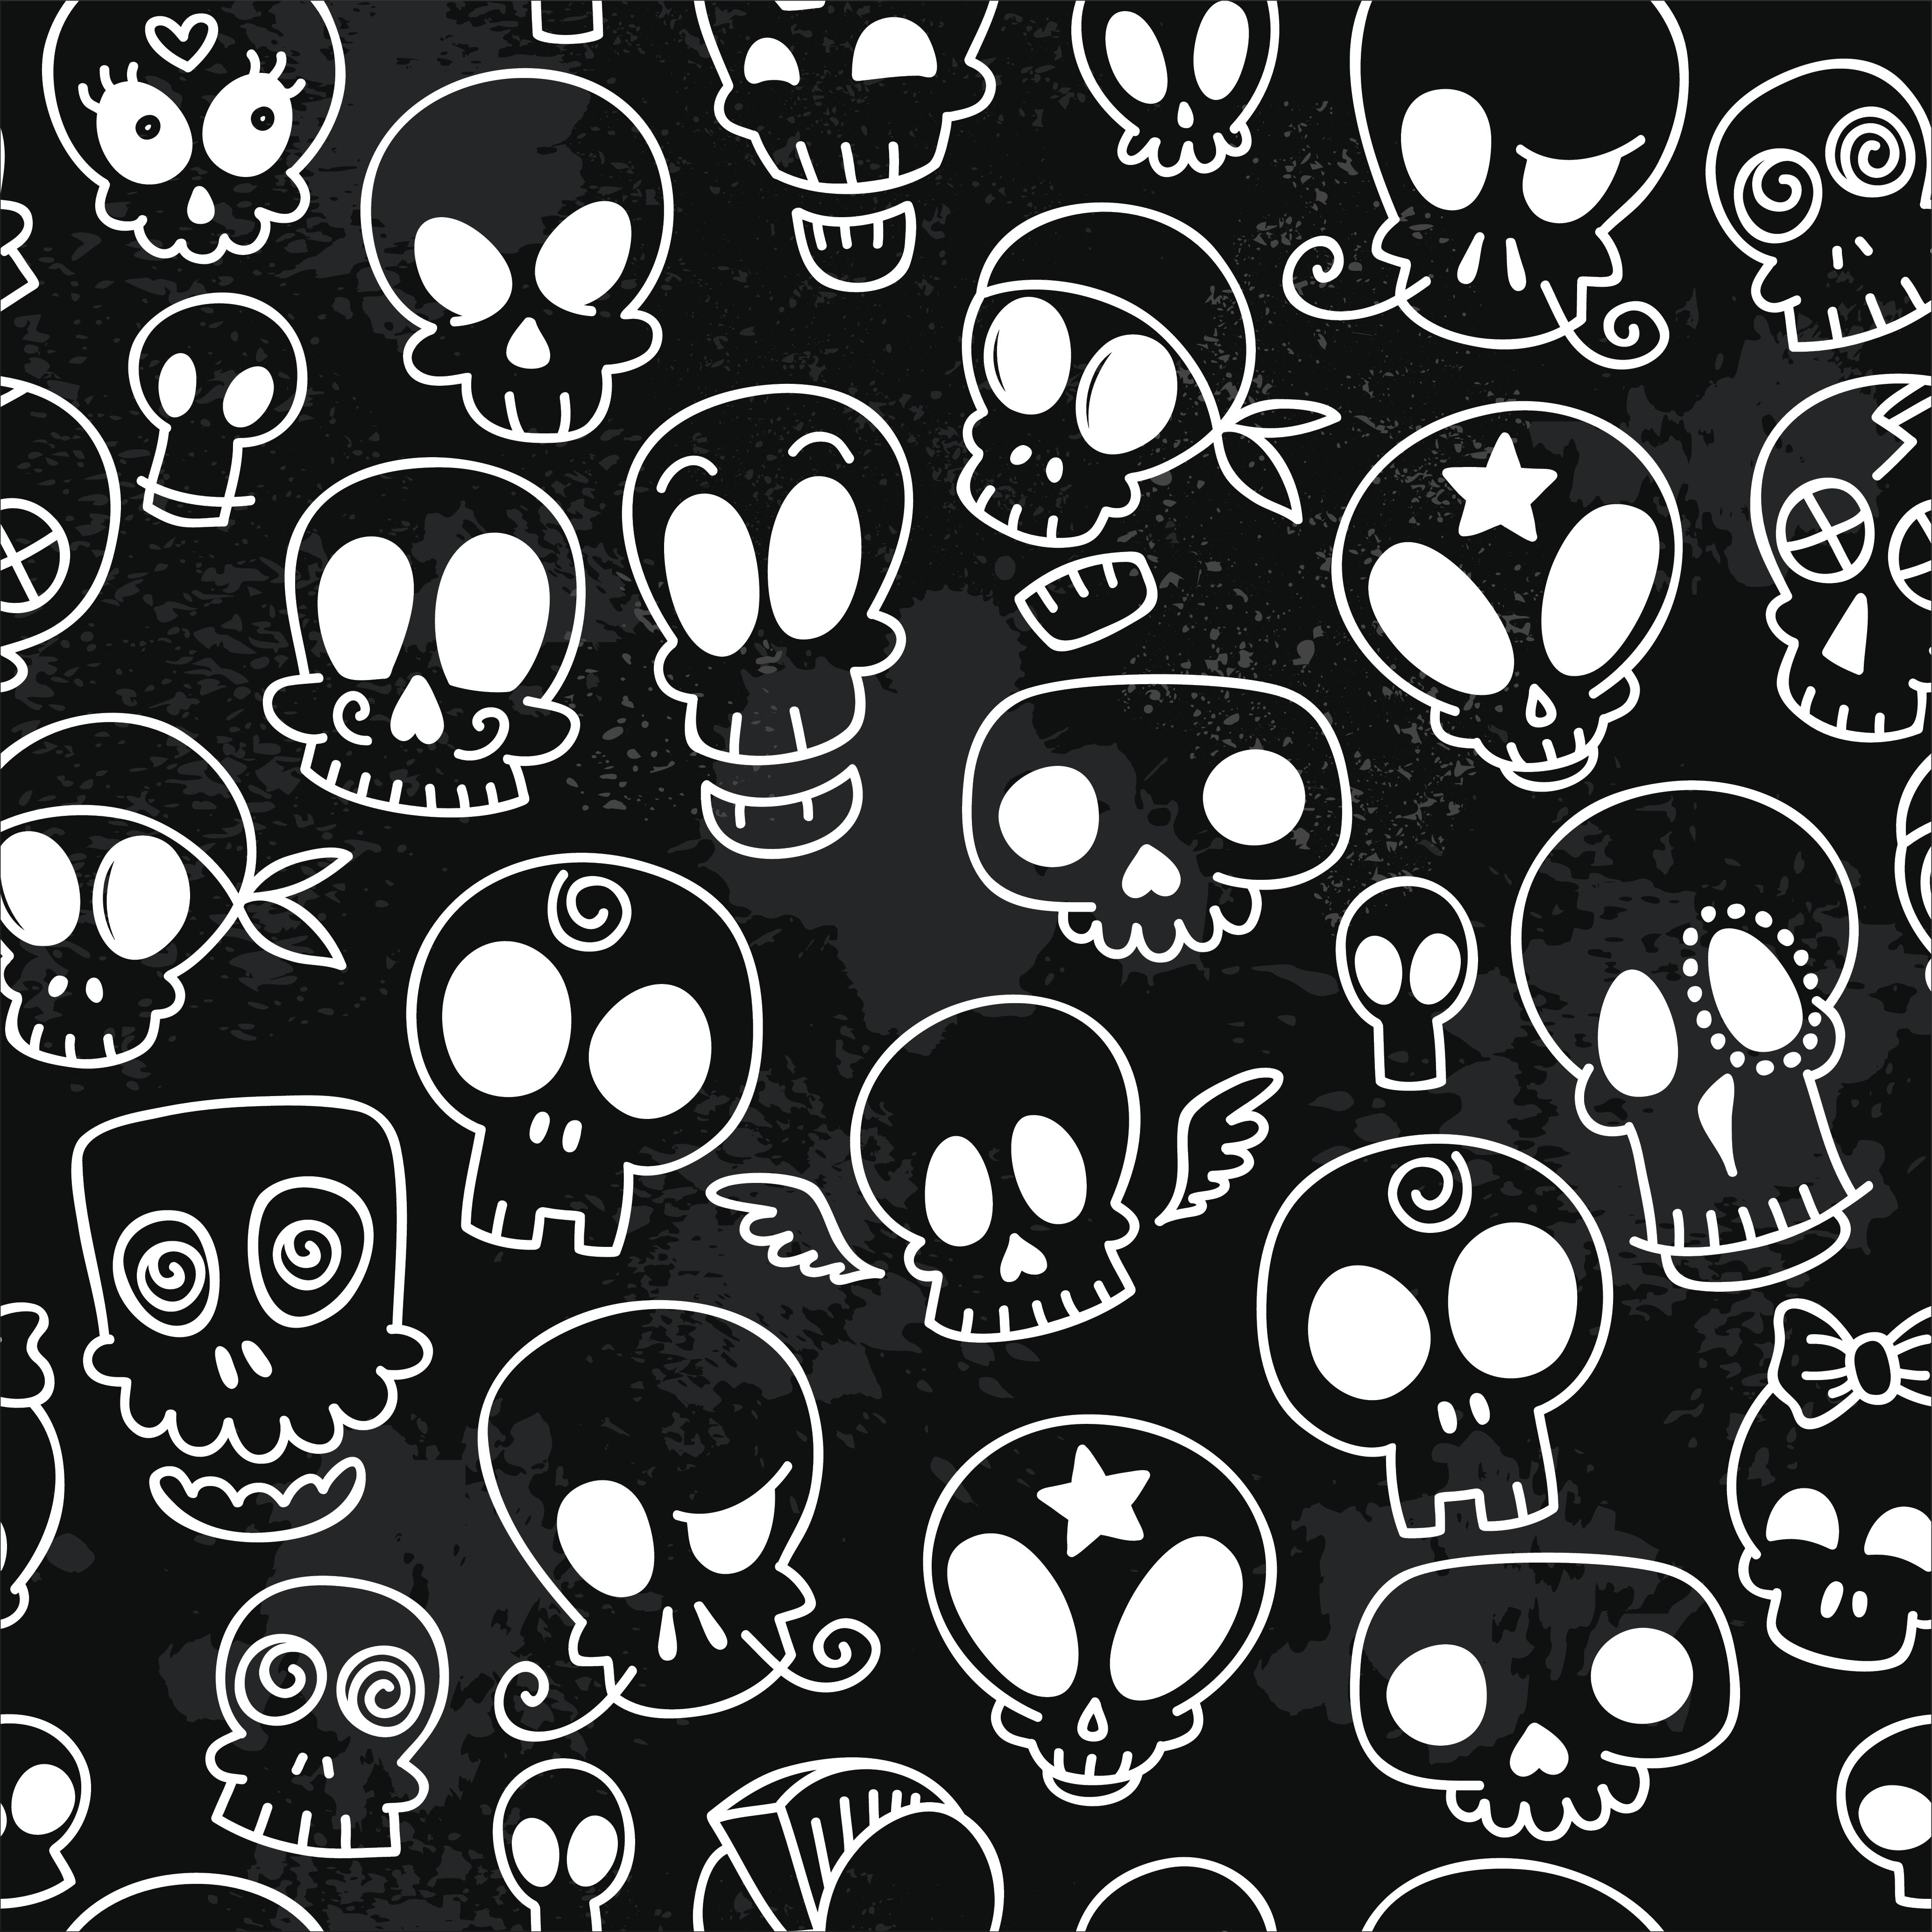 Black and white drawing of skulls